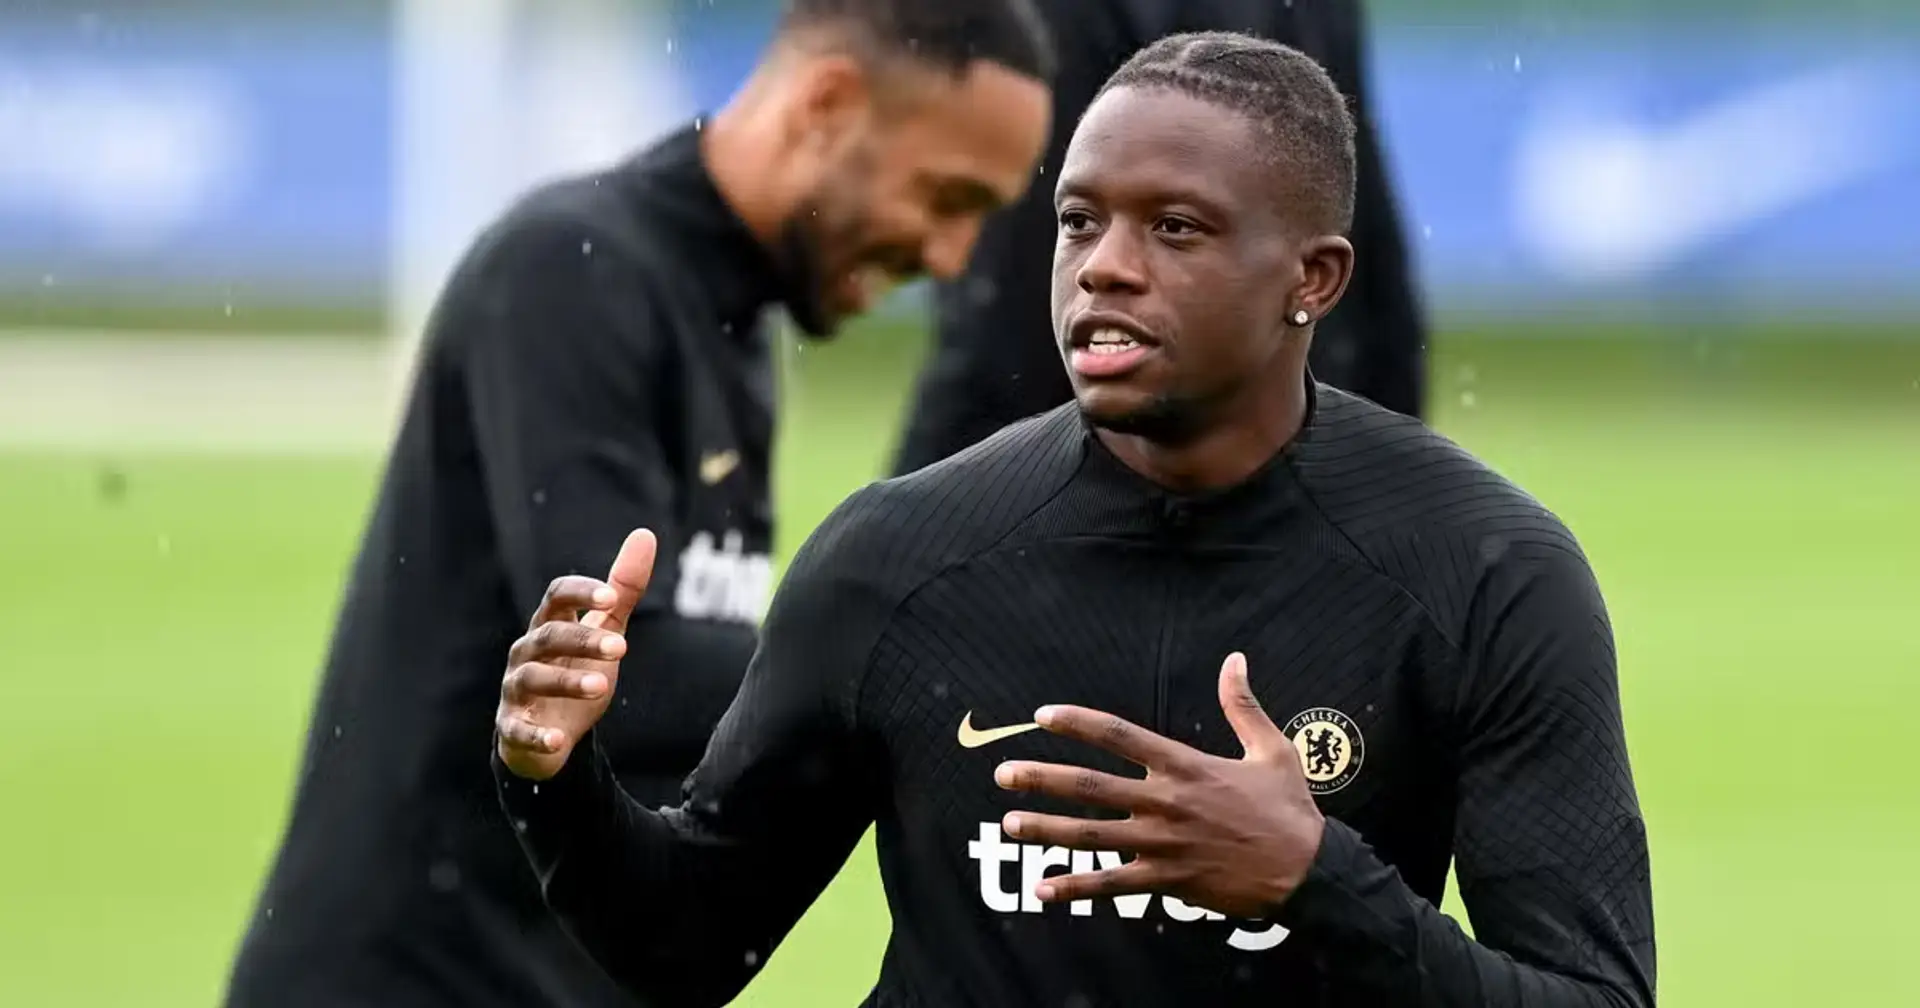 'I have to show I am good': Zakaria aims to turn Chelsea loan spell around after World Cup break